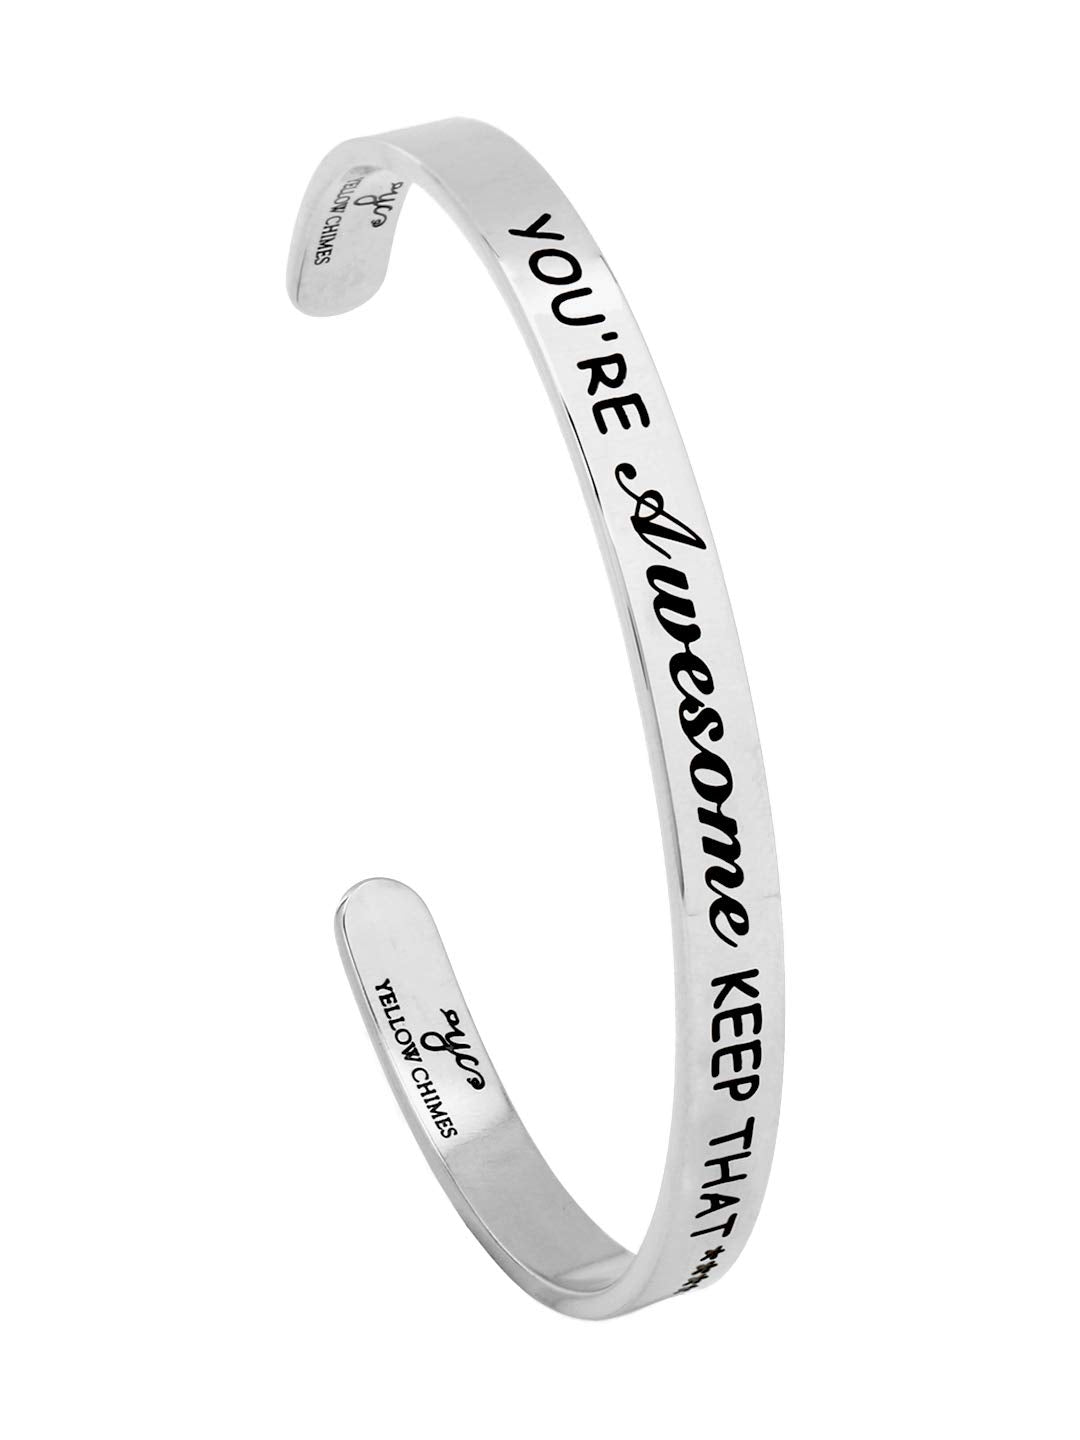 Yellow Chimes "You'Re Awesome Keep That Up (Unisex) Inspirational Gifts Message Engraved Karma Band Bracelet Bangle Mirror Polish Stainless Steel for Women & Men